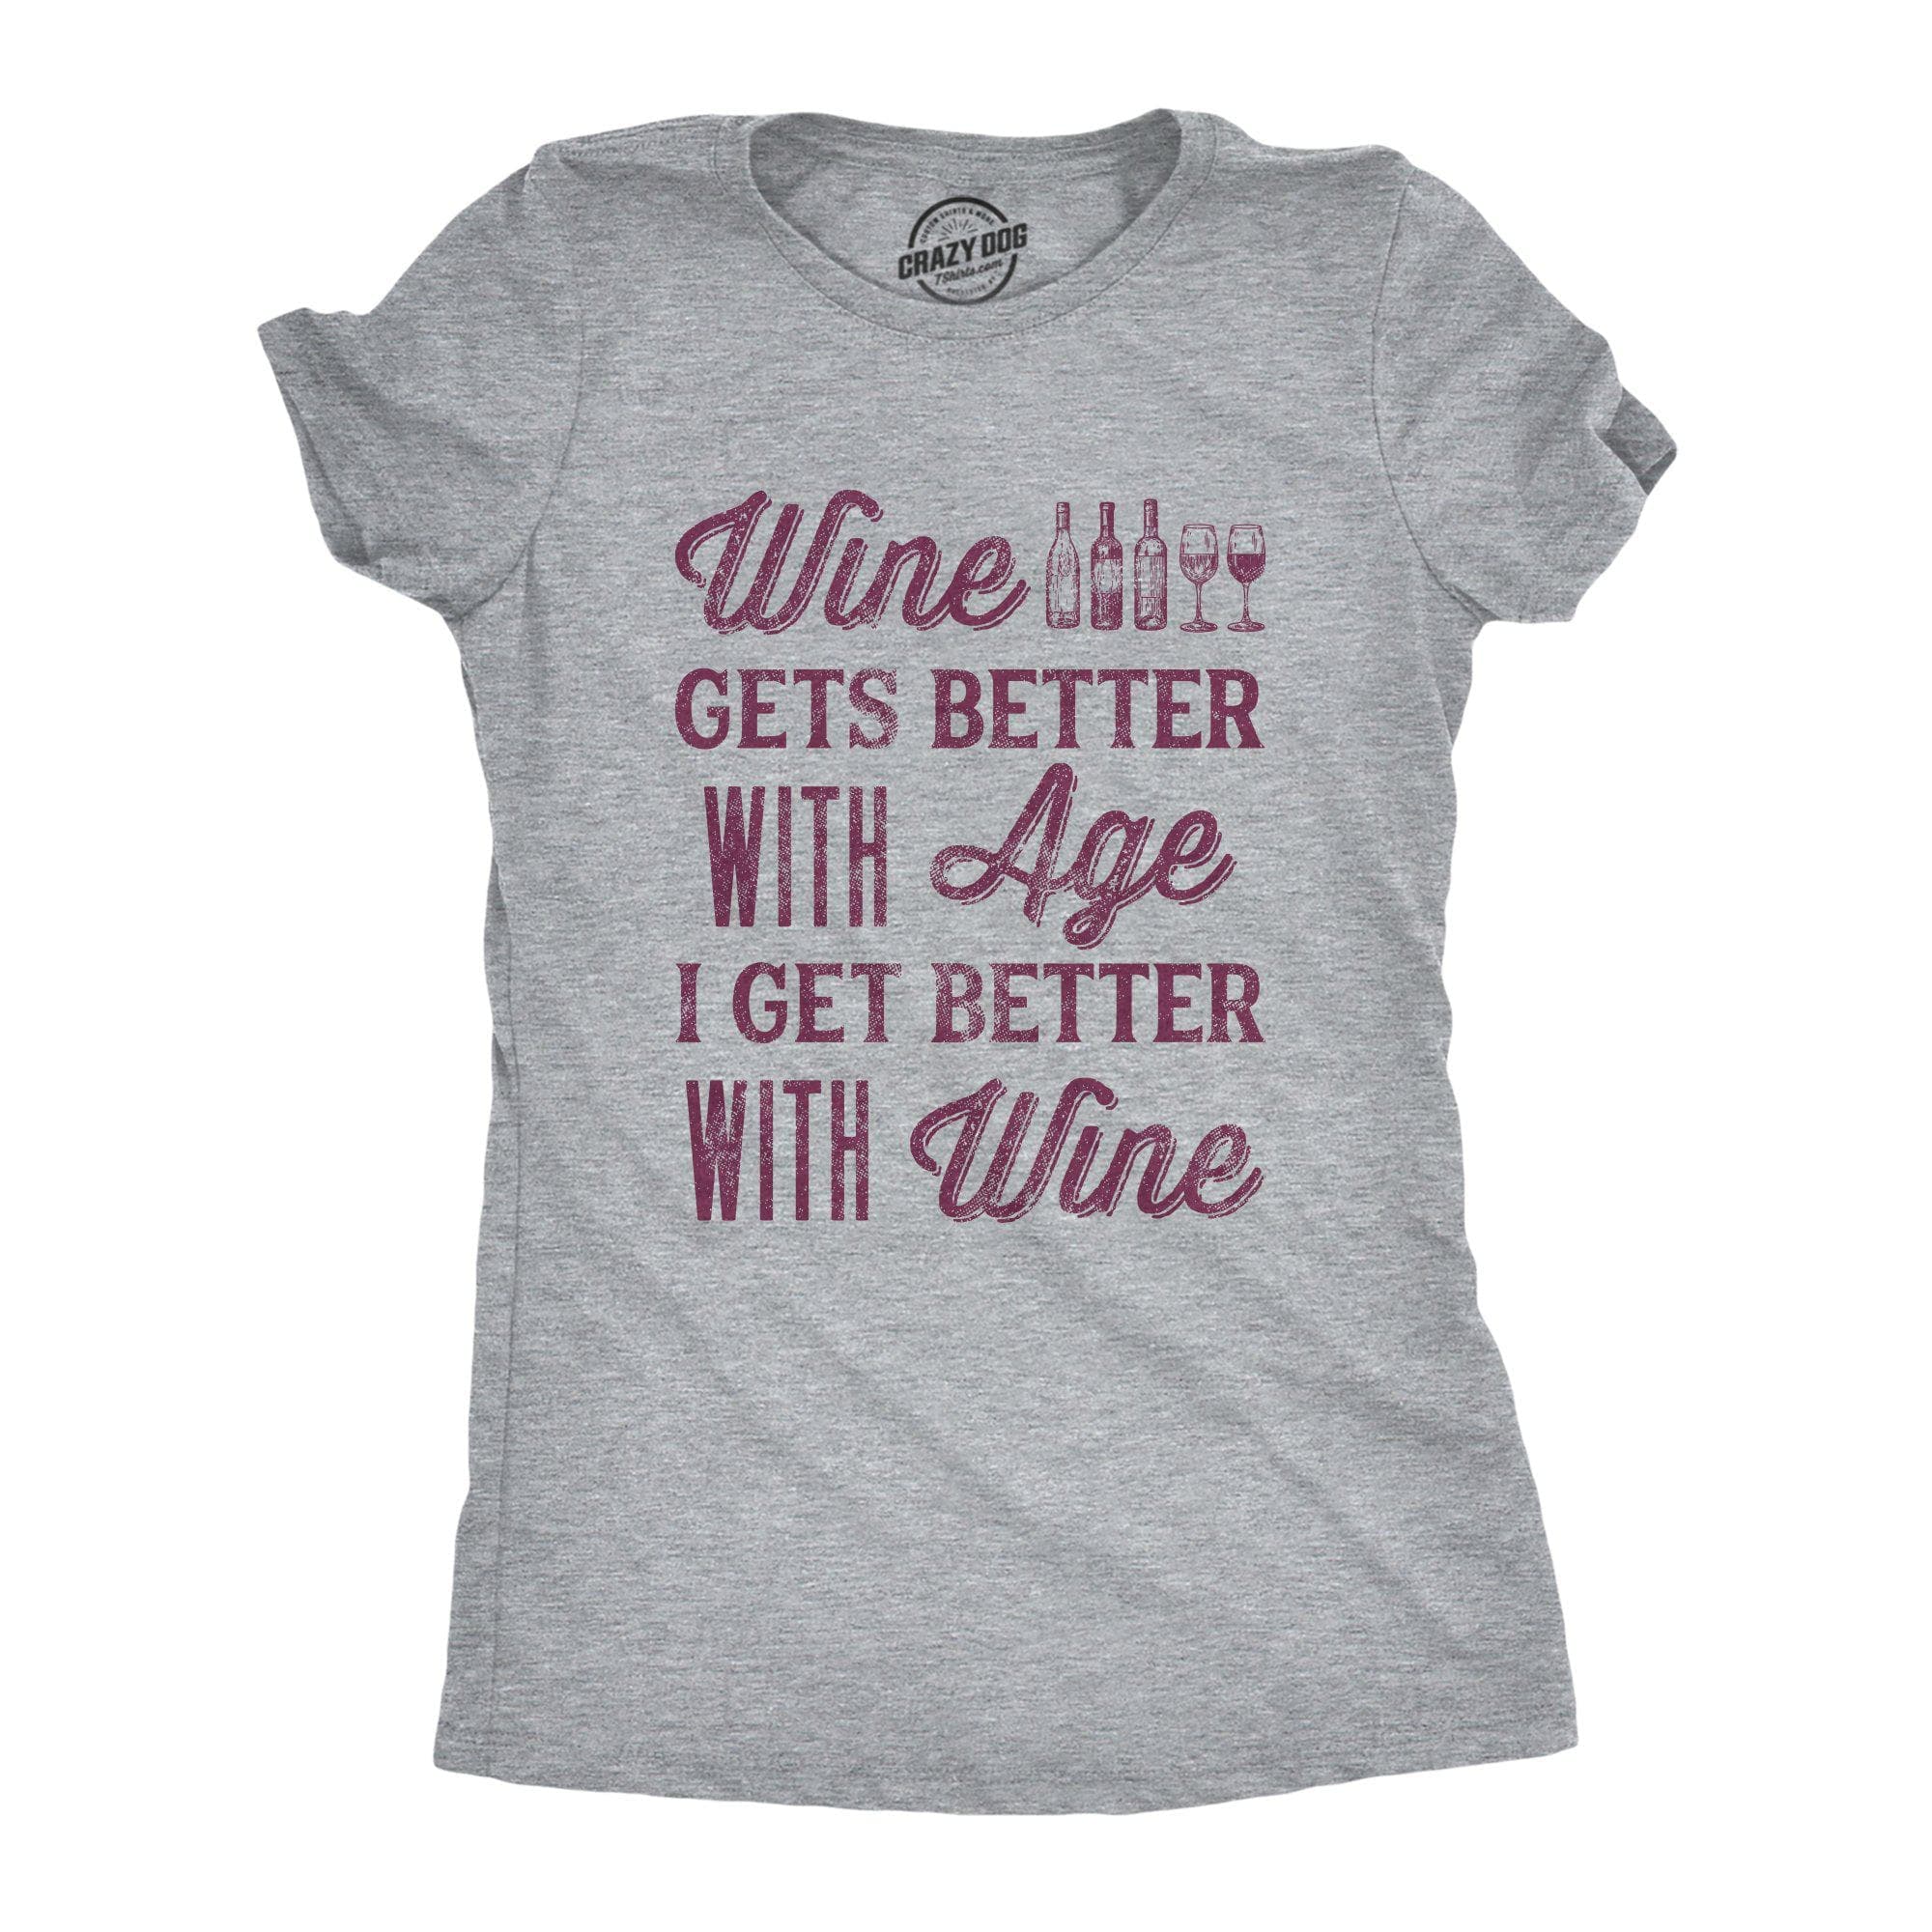 Wine Gets Better With Age I Get Better With Wine Women's Tshirt - Crazy Dog T-Shirts